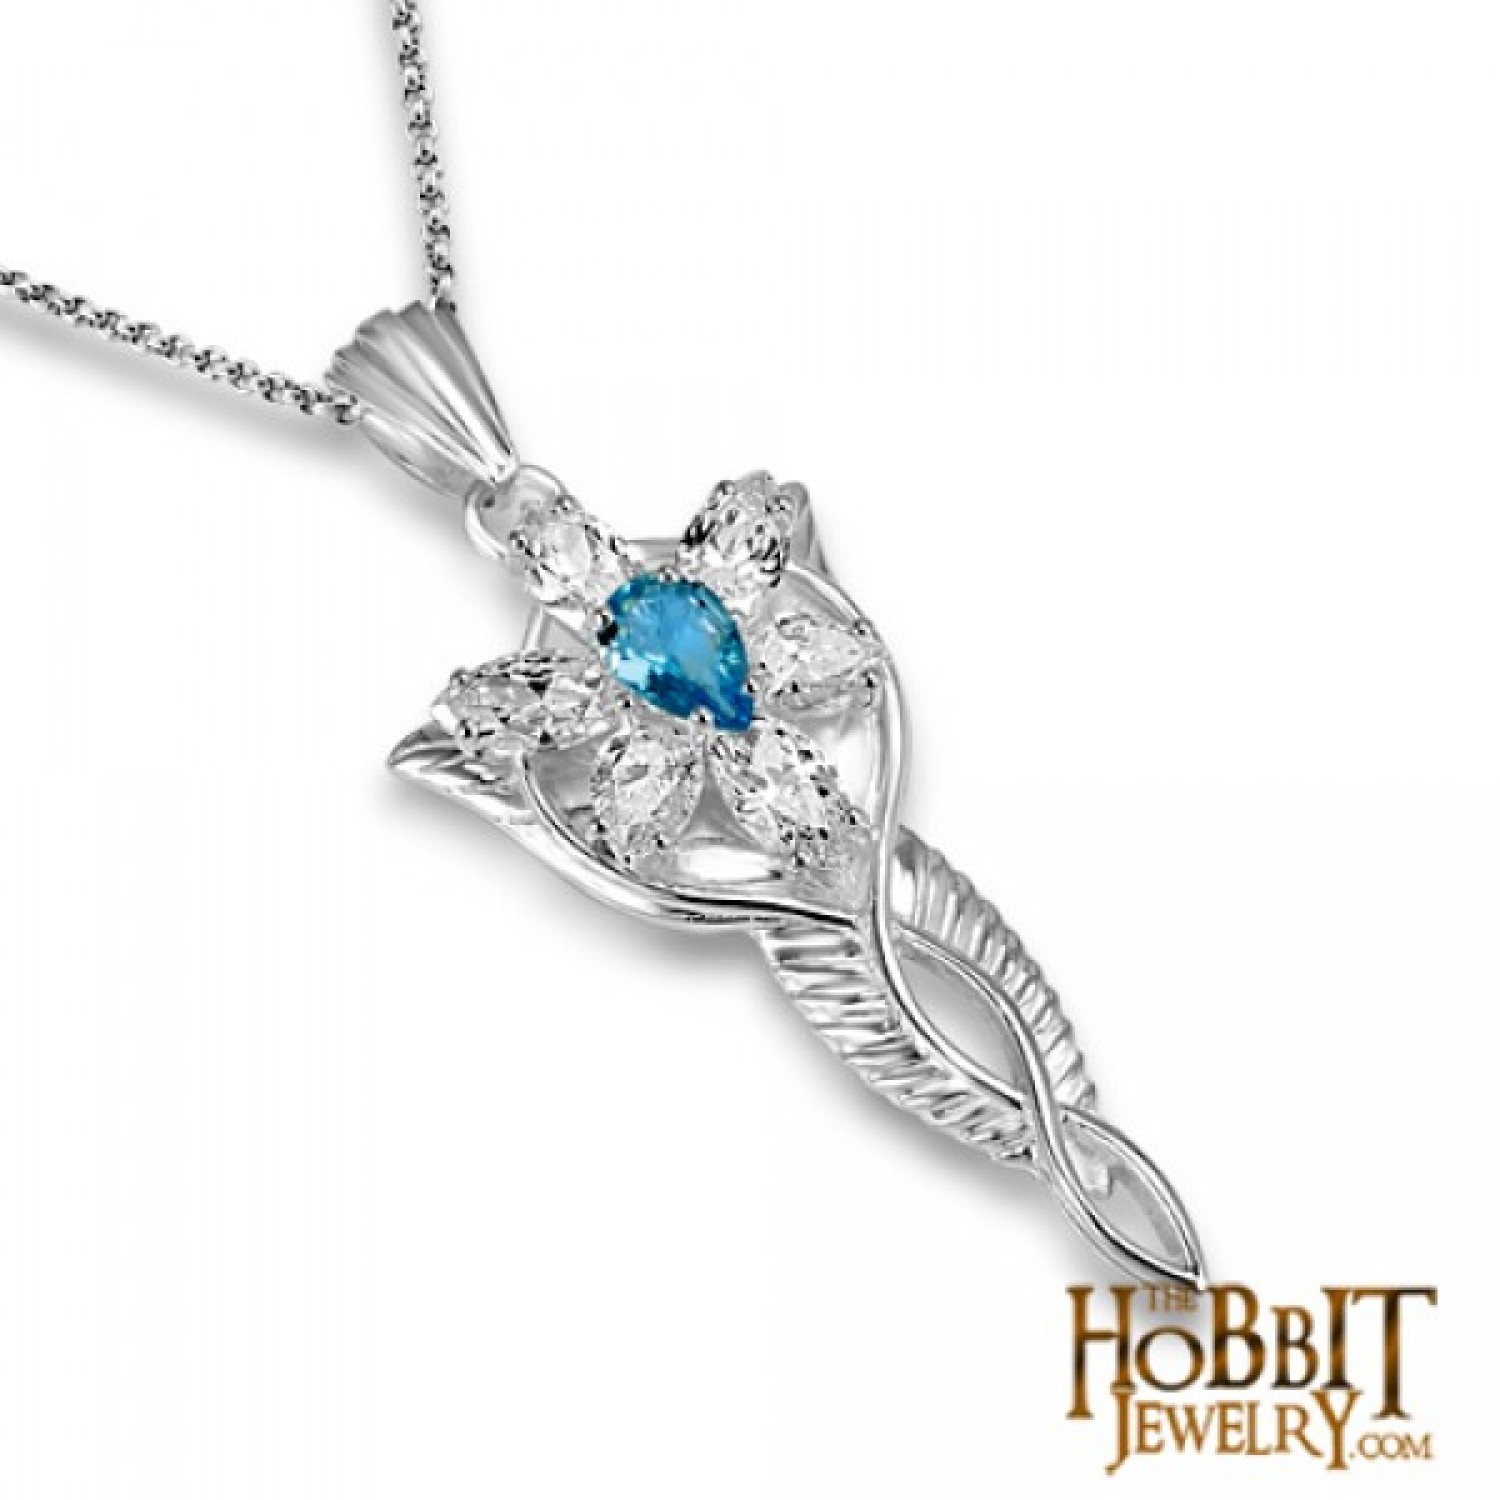 Lord of the Rings Official  Topaz Evenstar Necklace in Silver. ...and she took a white gem like a star that lay upon her breast hanging upon a silver chain... The EVENSTAR PENDANT was given to Aragorn by Arwen to show her eternal love. The pendant is insp